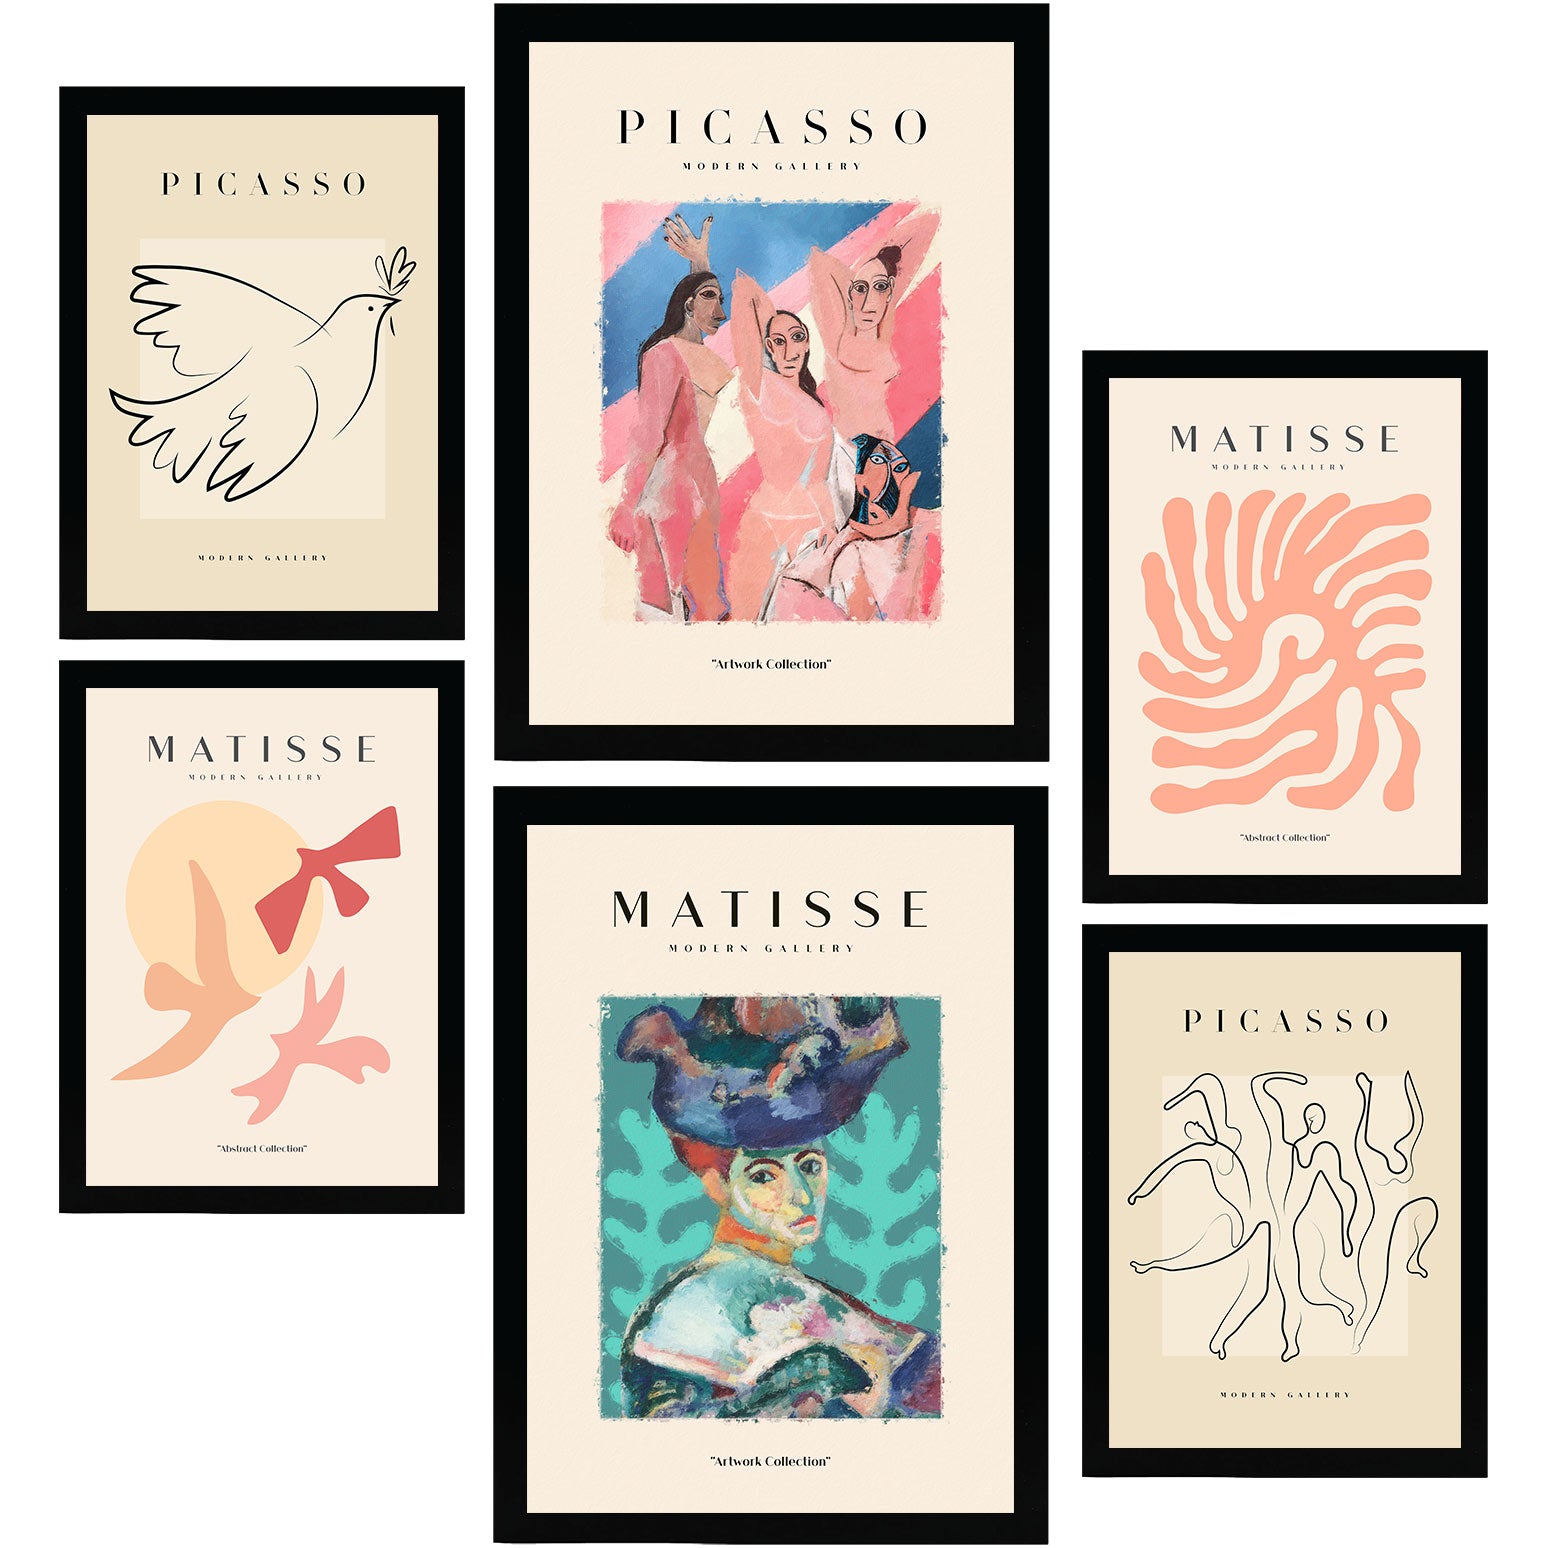 Picasso and Matisse Posters. Bodies. Fauvism and Surrealism Art Gallery-Artwork-Nacnic-Nacnic Estudio SL